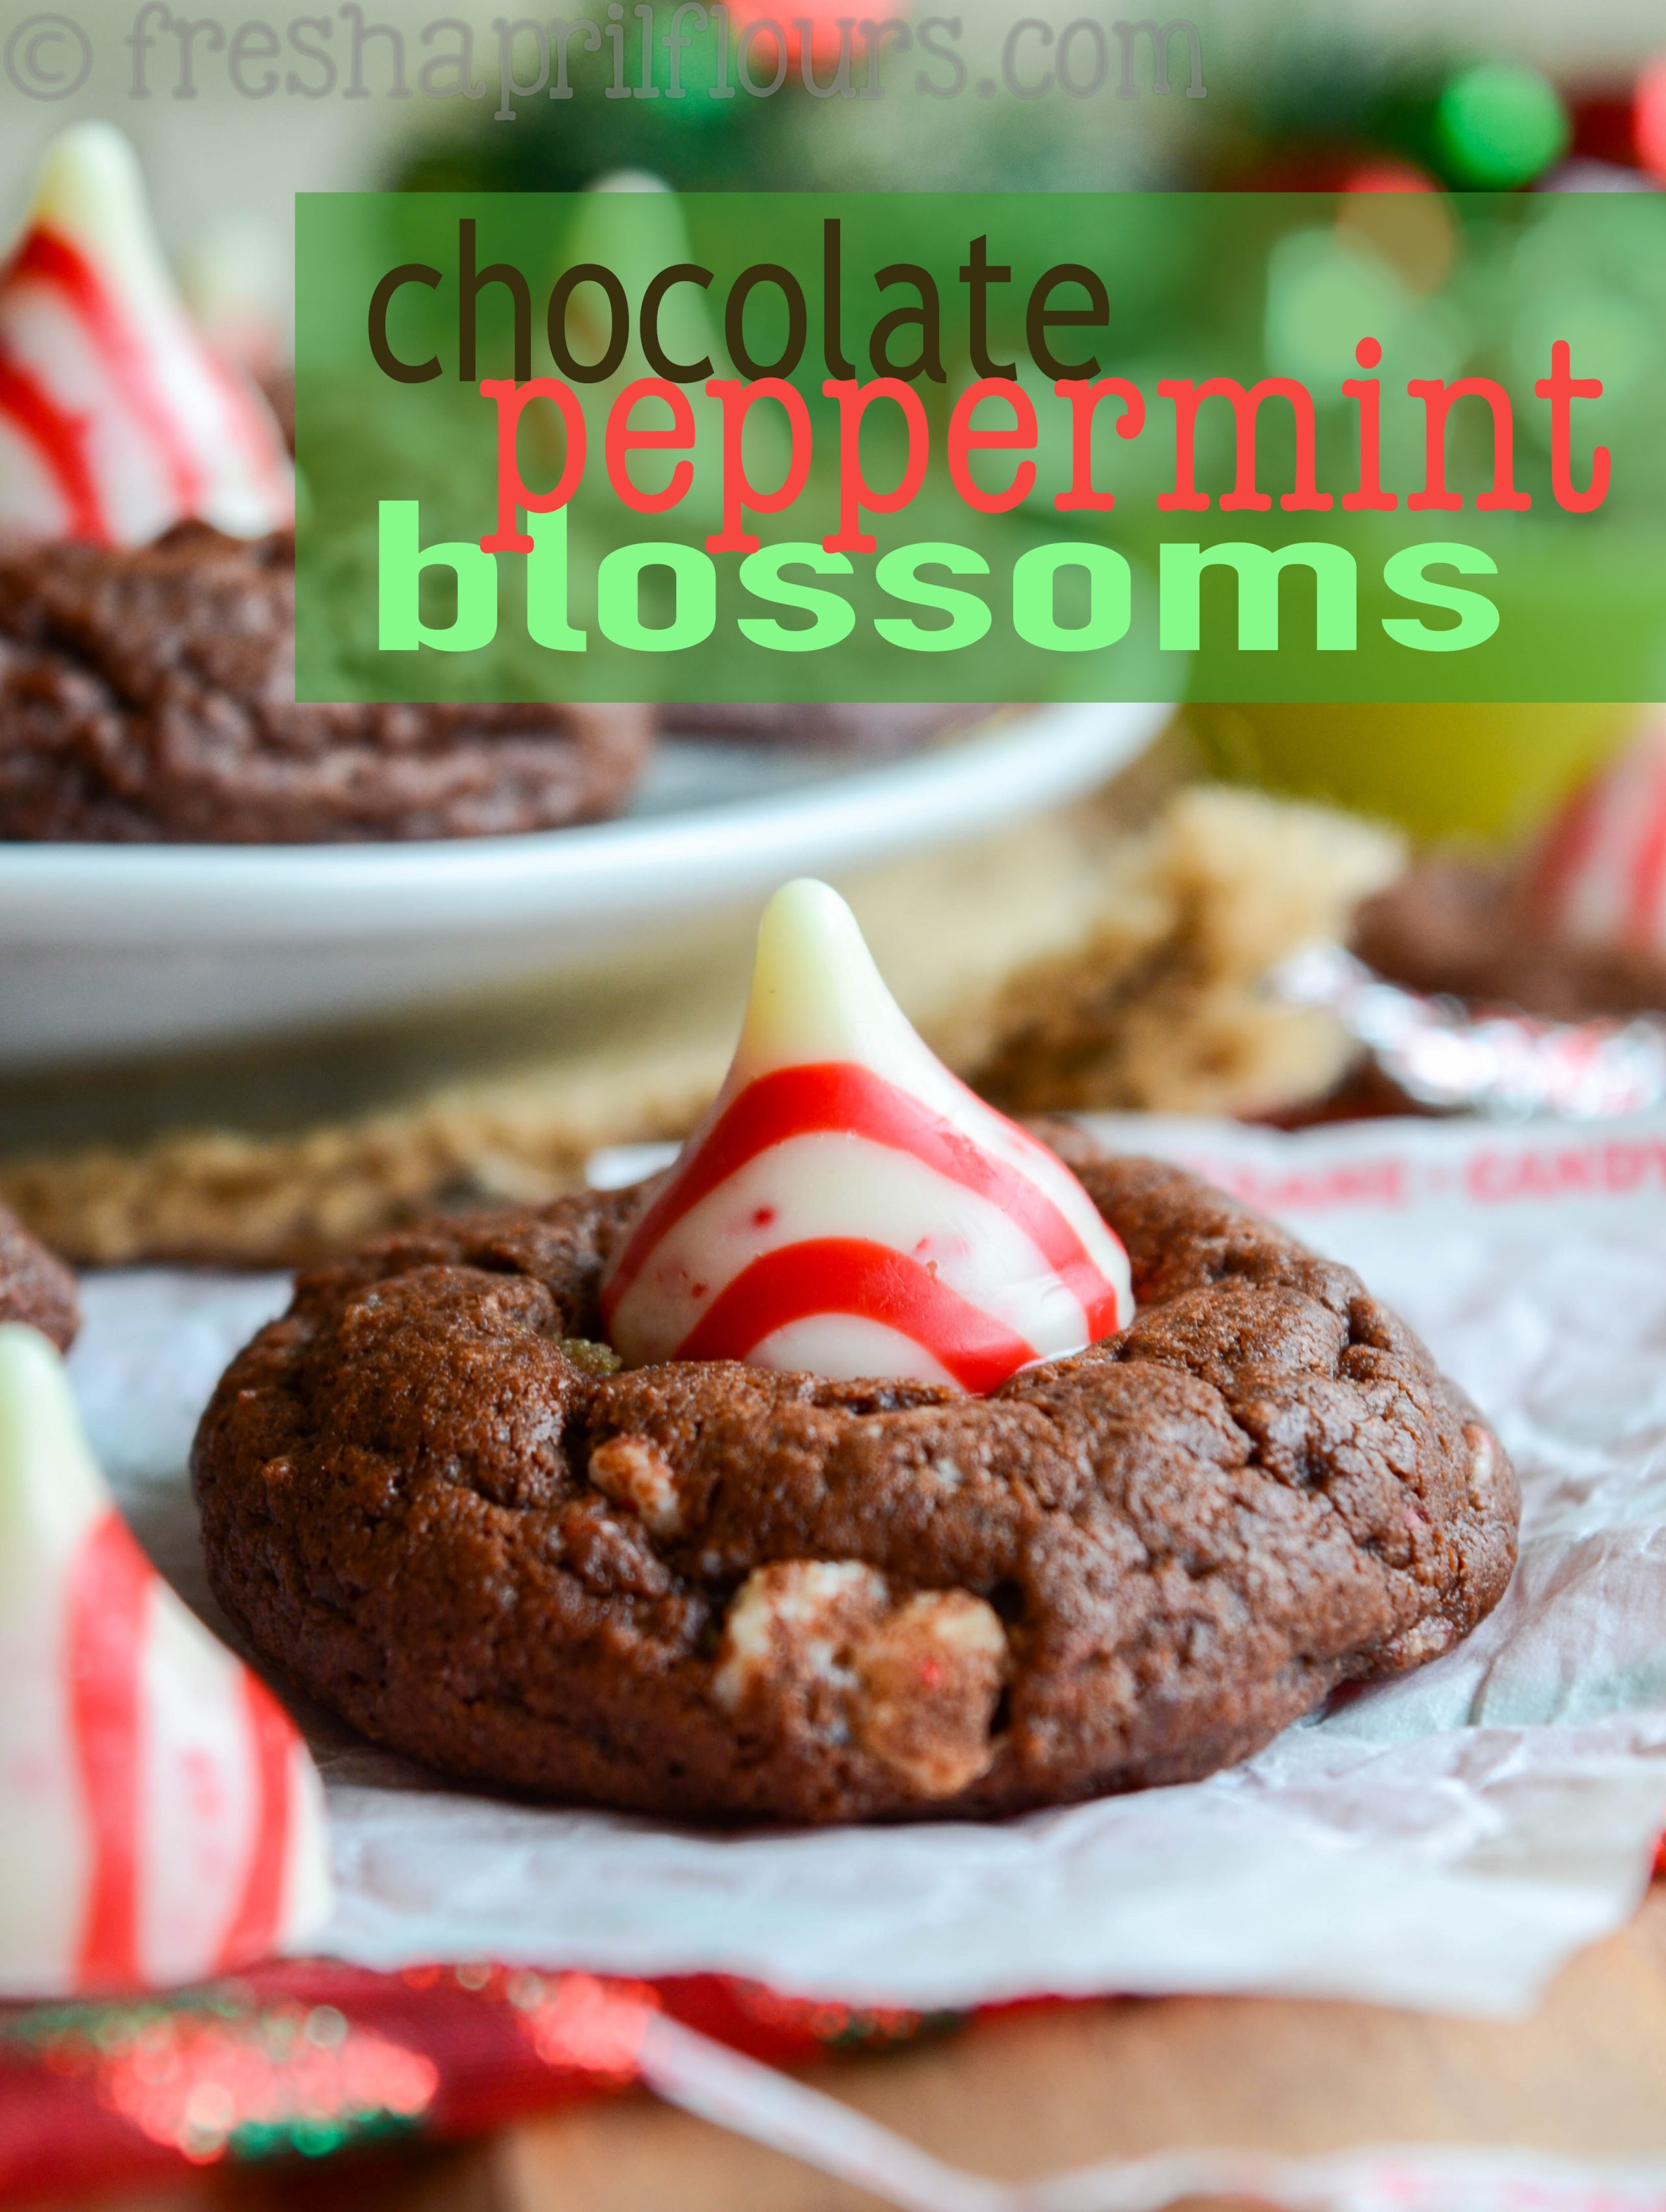 Chocolate Peppermint Blossoms: A holiday take on the classic "blossom" cookie! A simple chocolate cookie speckled with chopped candy cane Hershey's Kisses and topped with a swirly whole one. via @frshaprilflours